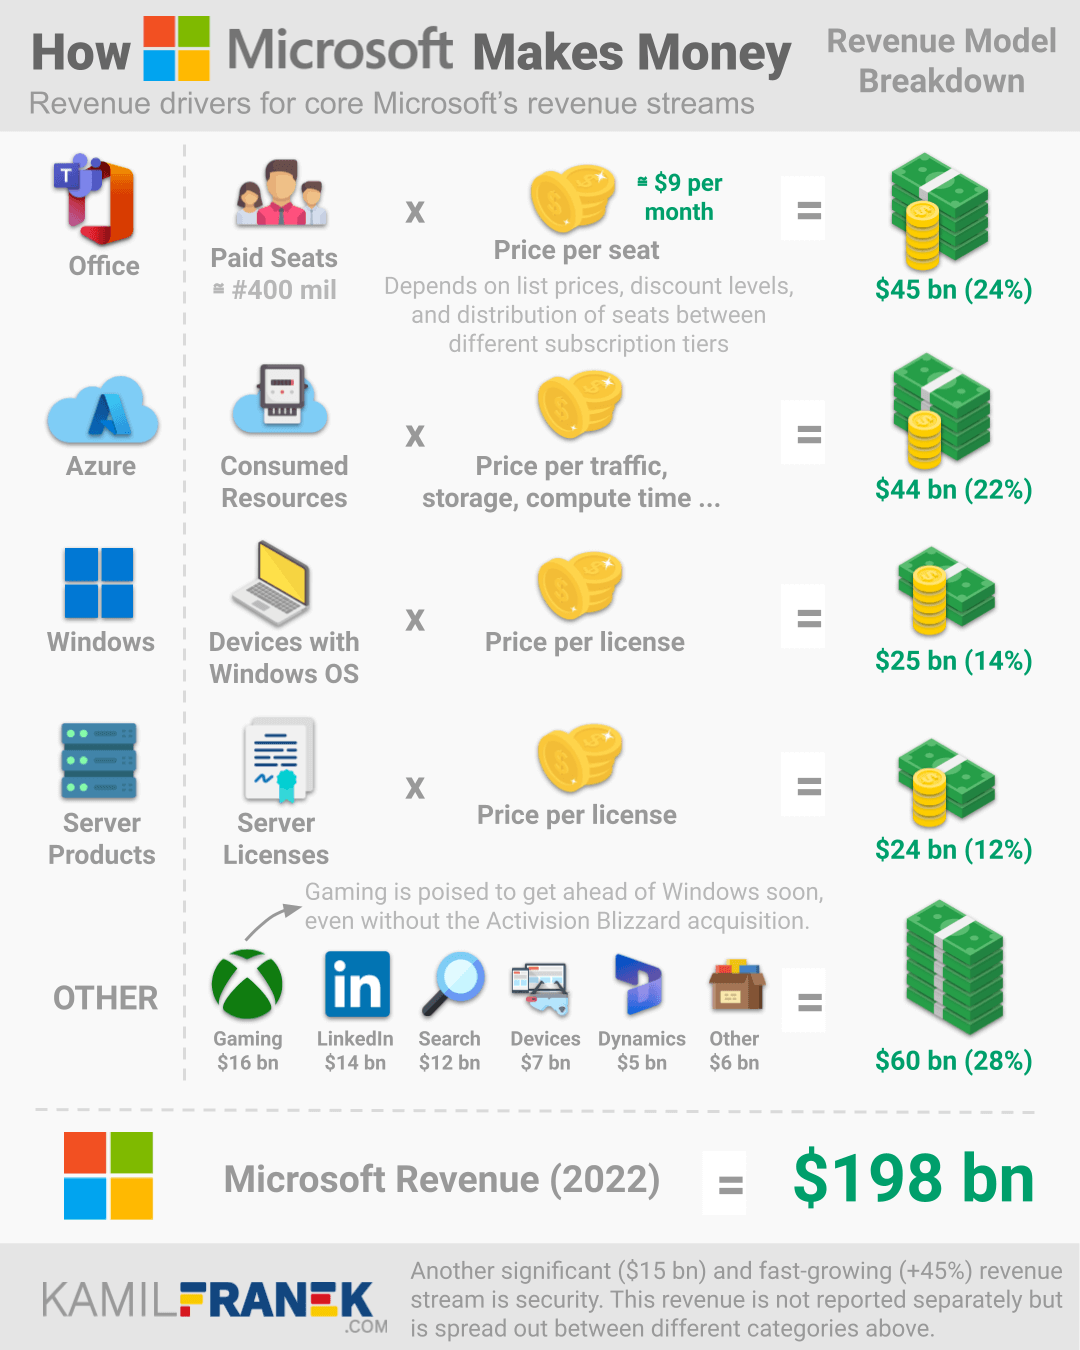 Revenue model breakdown visual, explaining how Microsoft makes money and from what